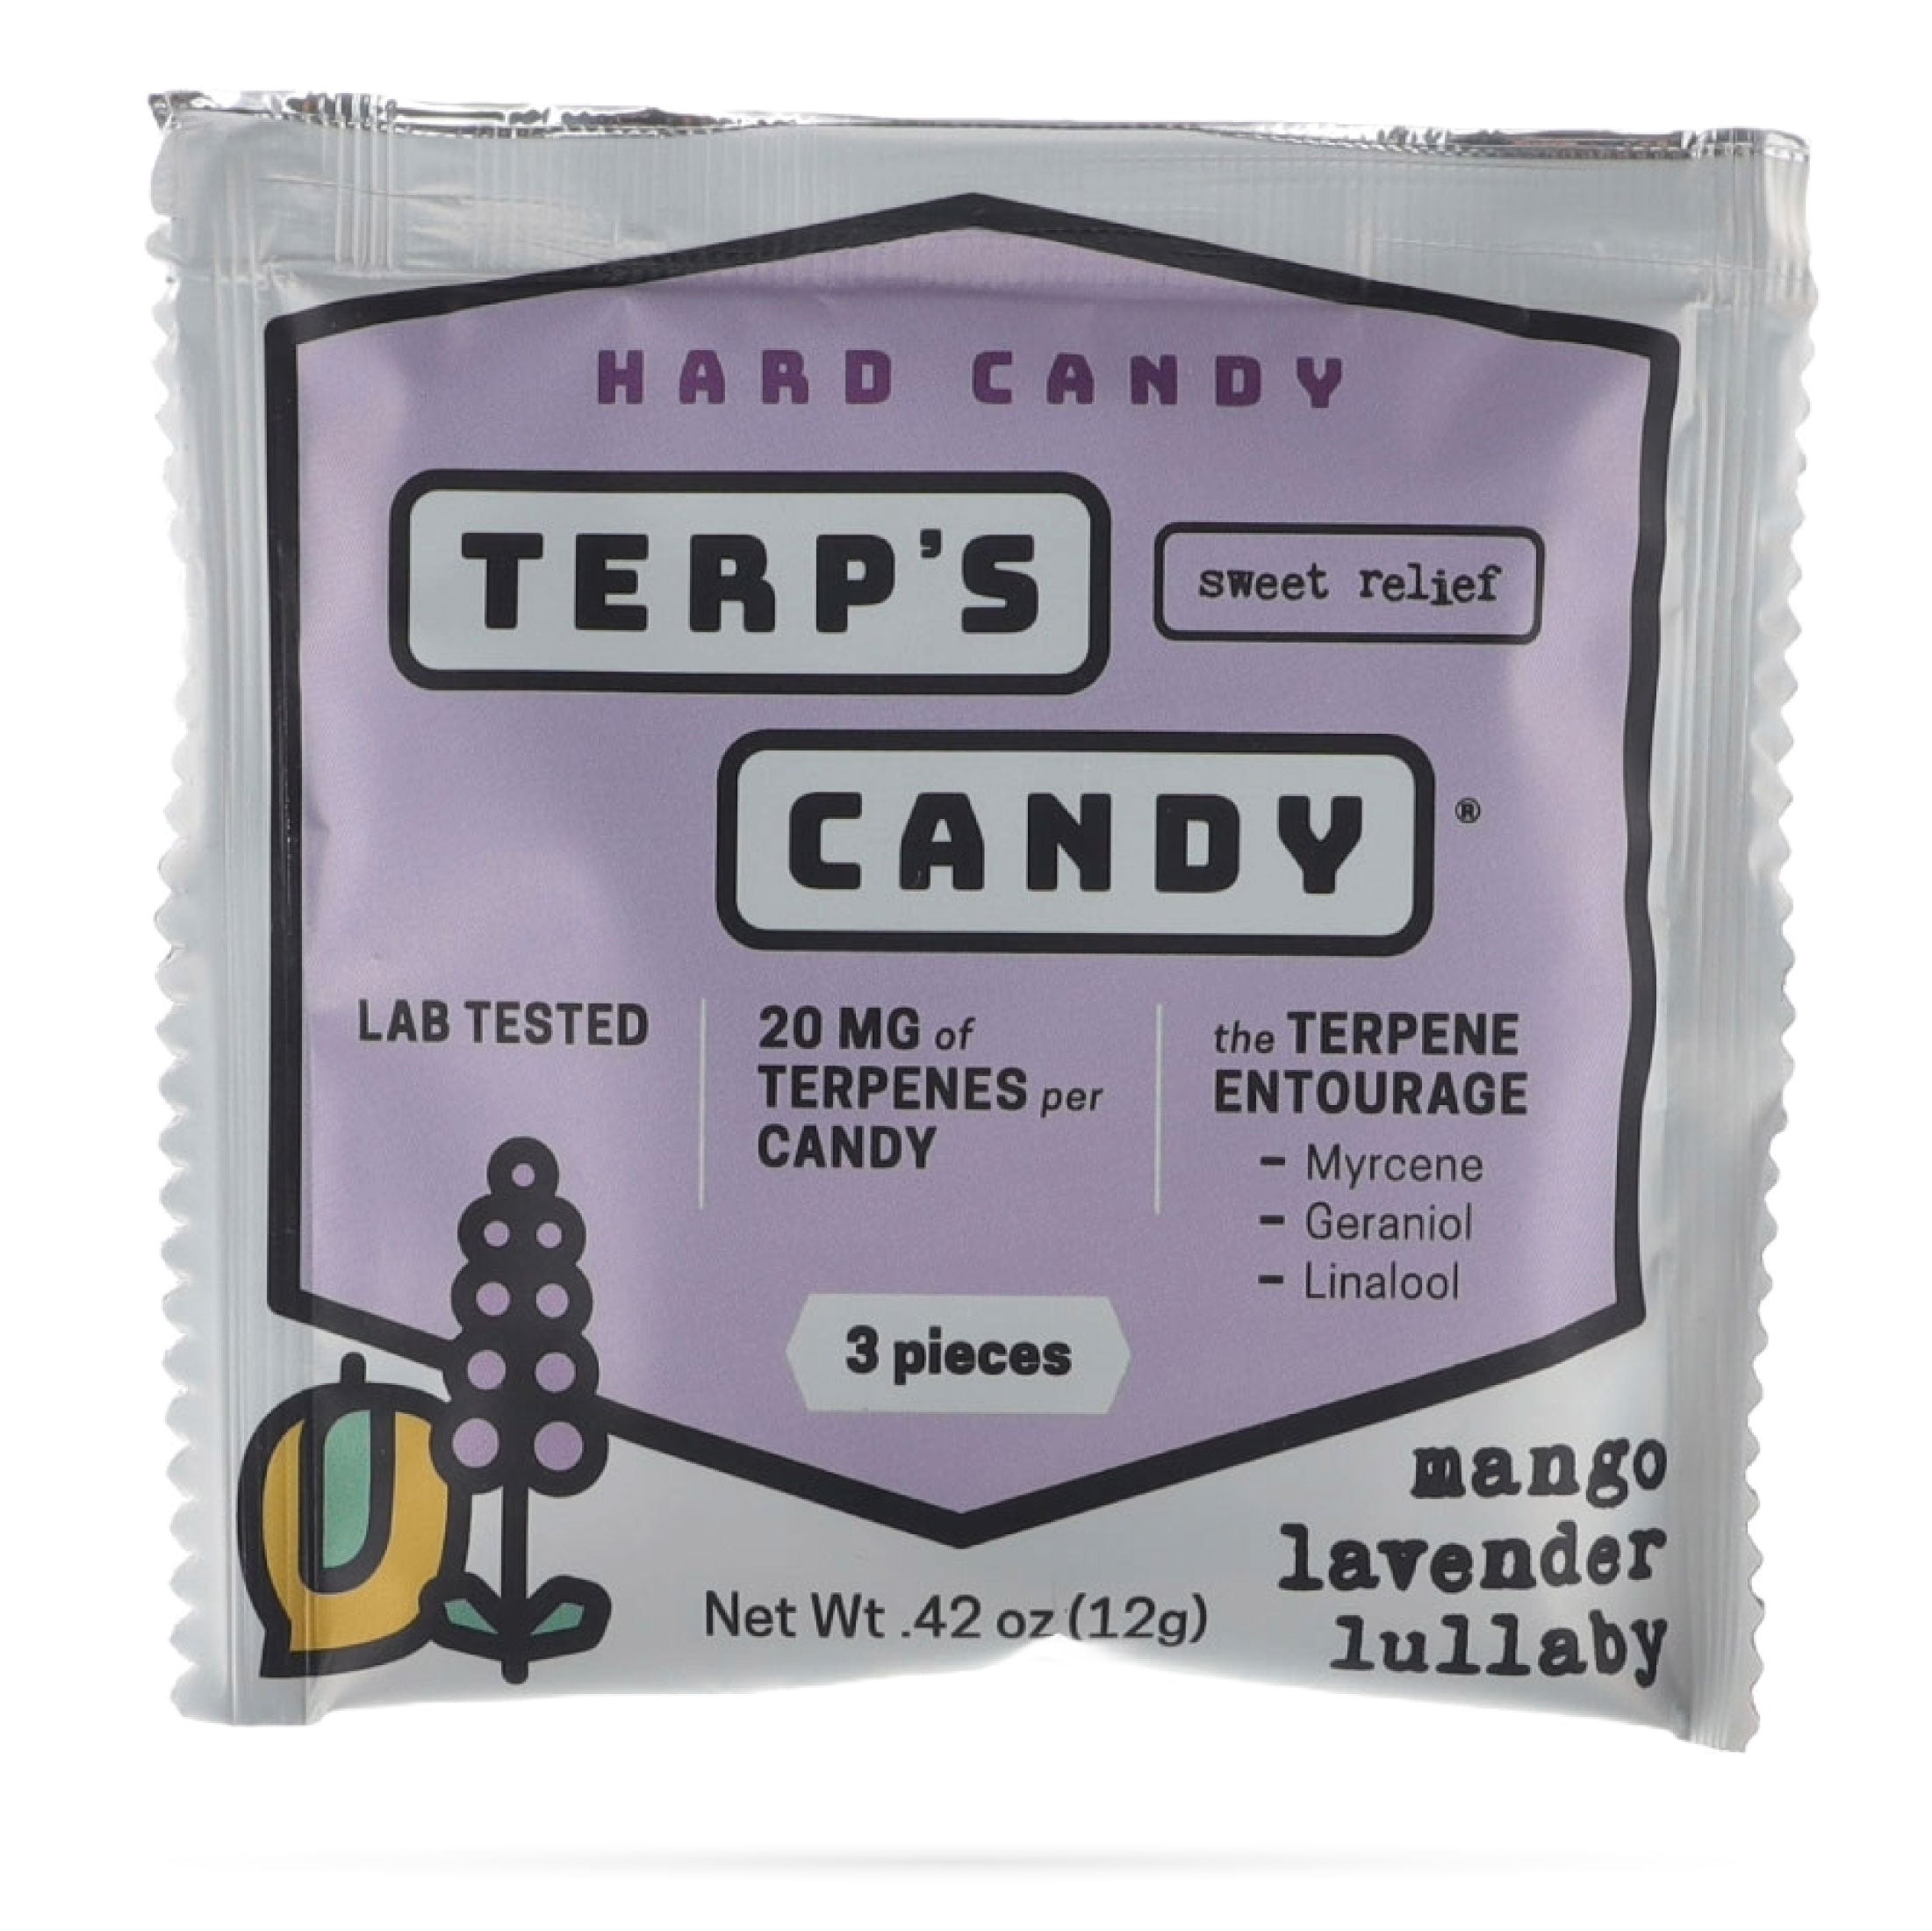 Image of Terp&#39;s Candy Mango Lavender Lullaby 3pc pouch.